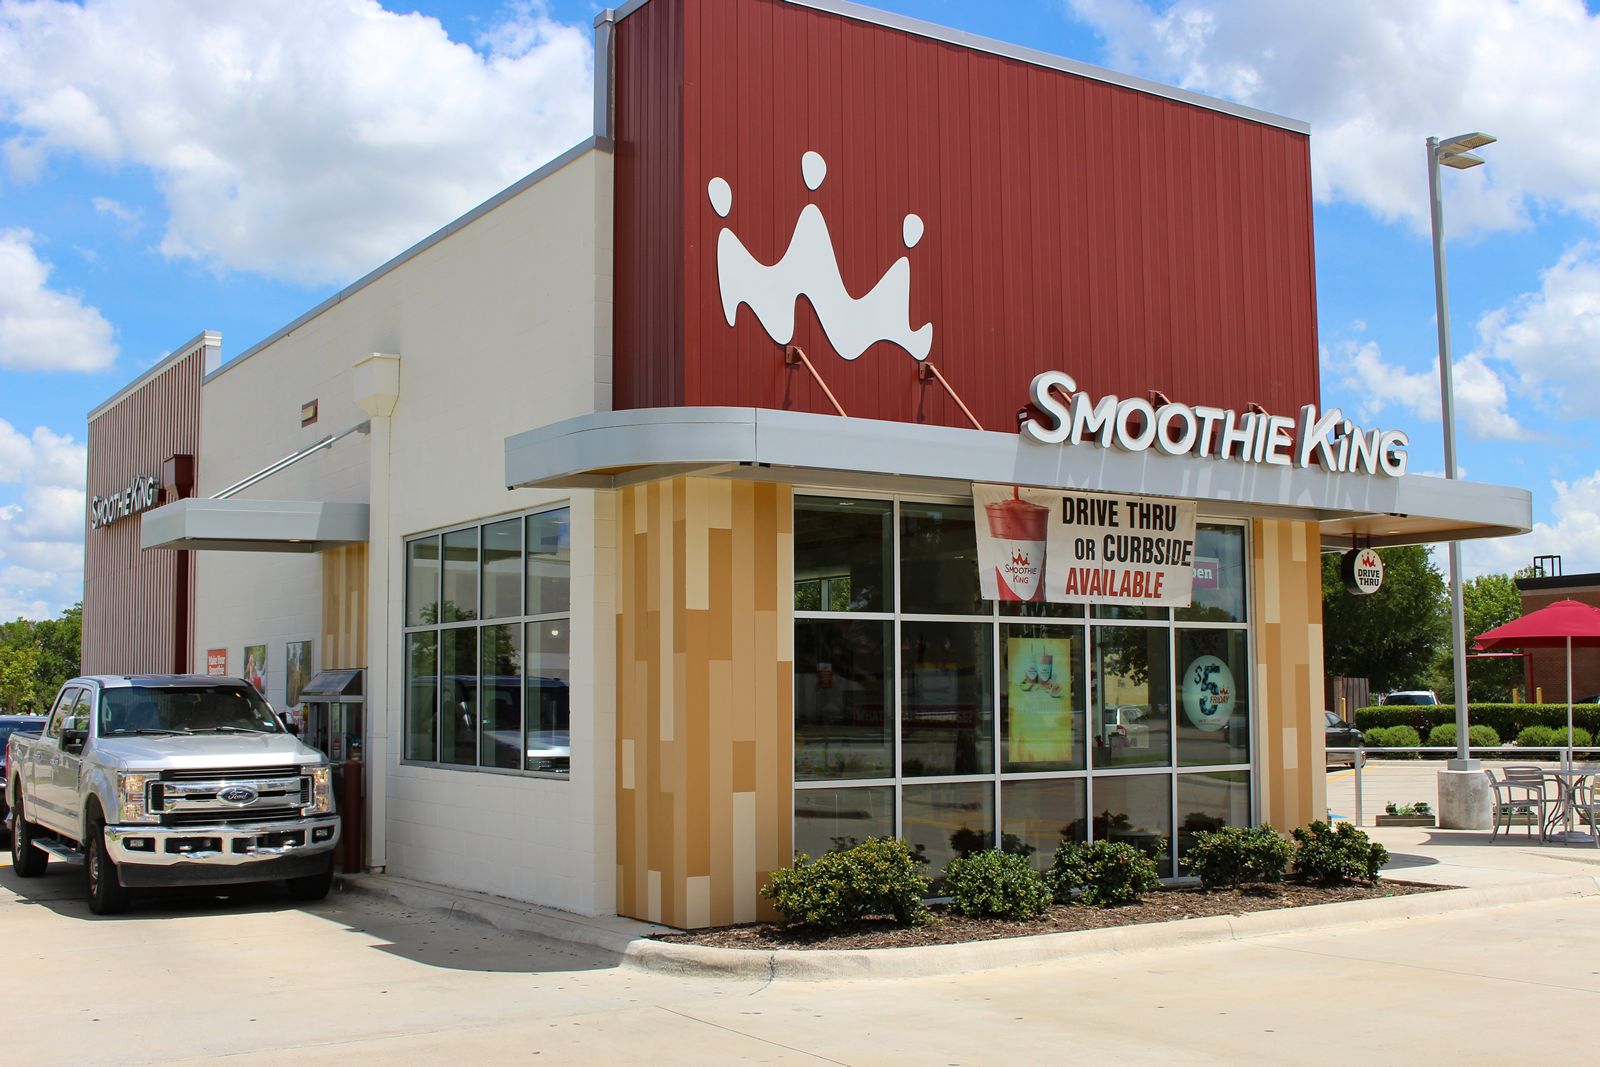 Building Momentum: Smoothie King Aims for Greater Growth in 2021